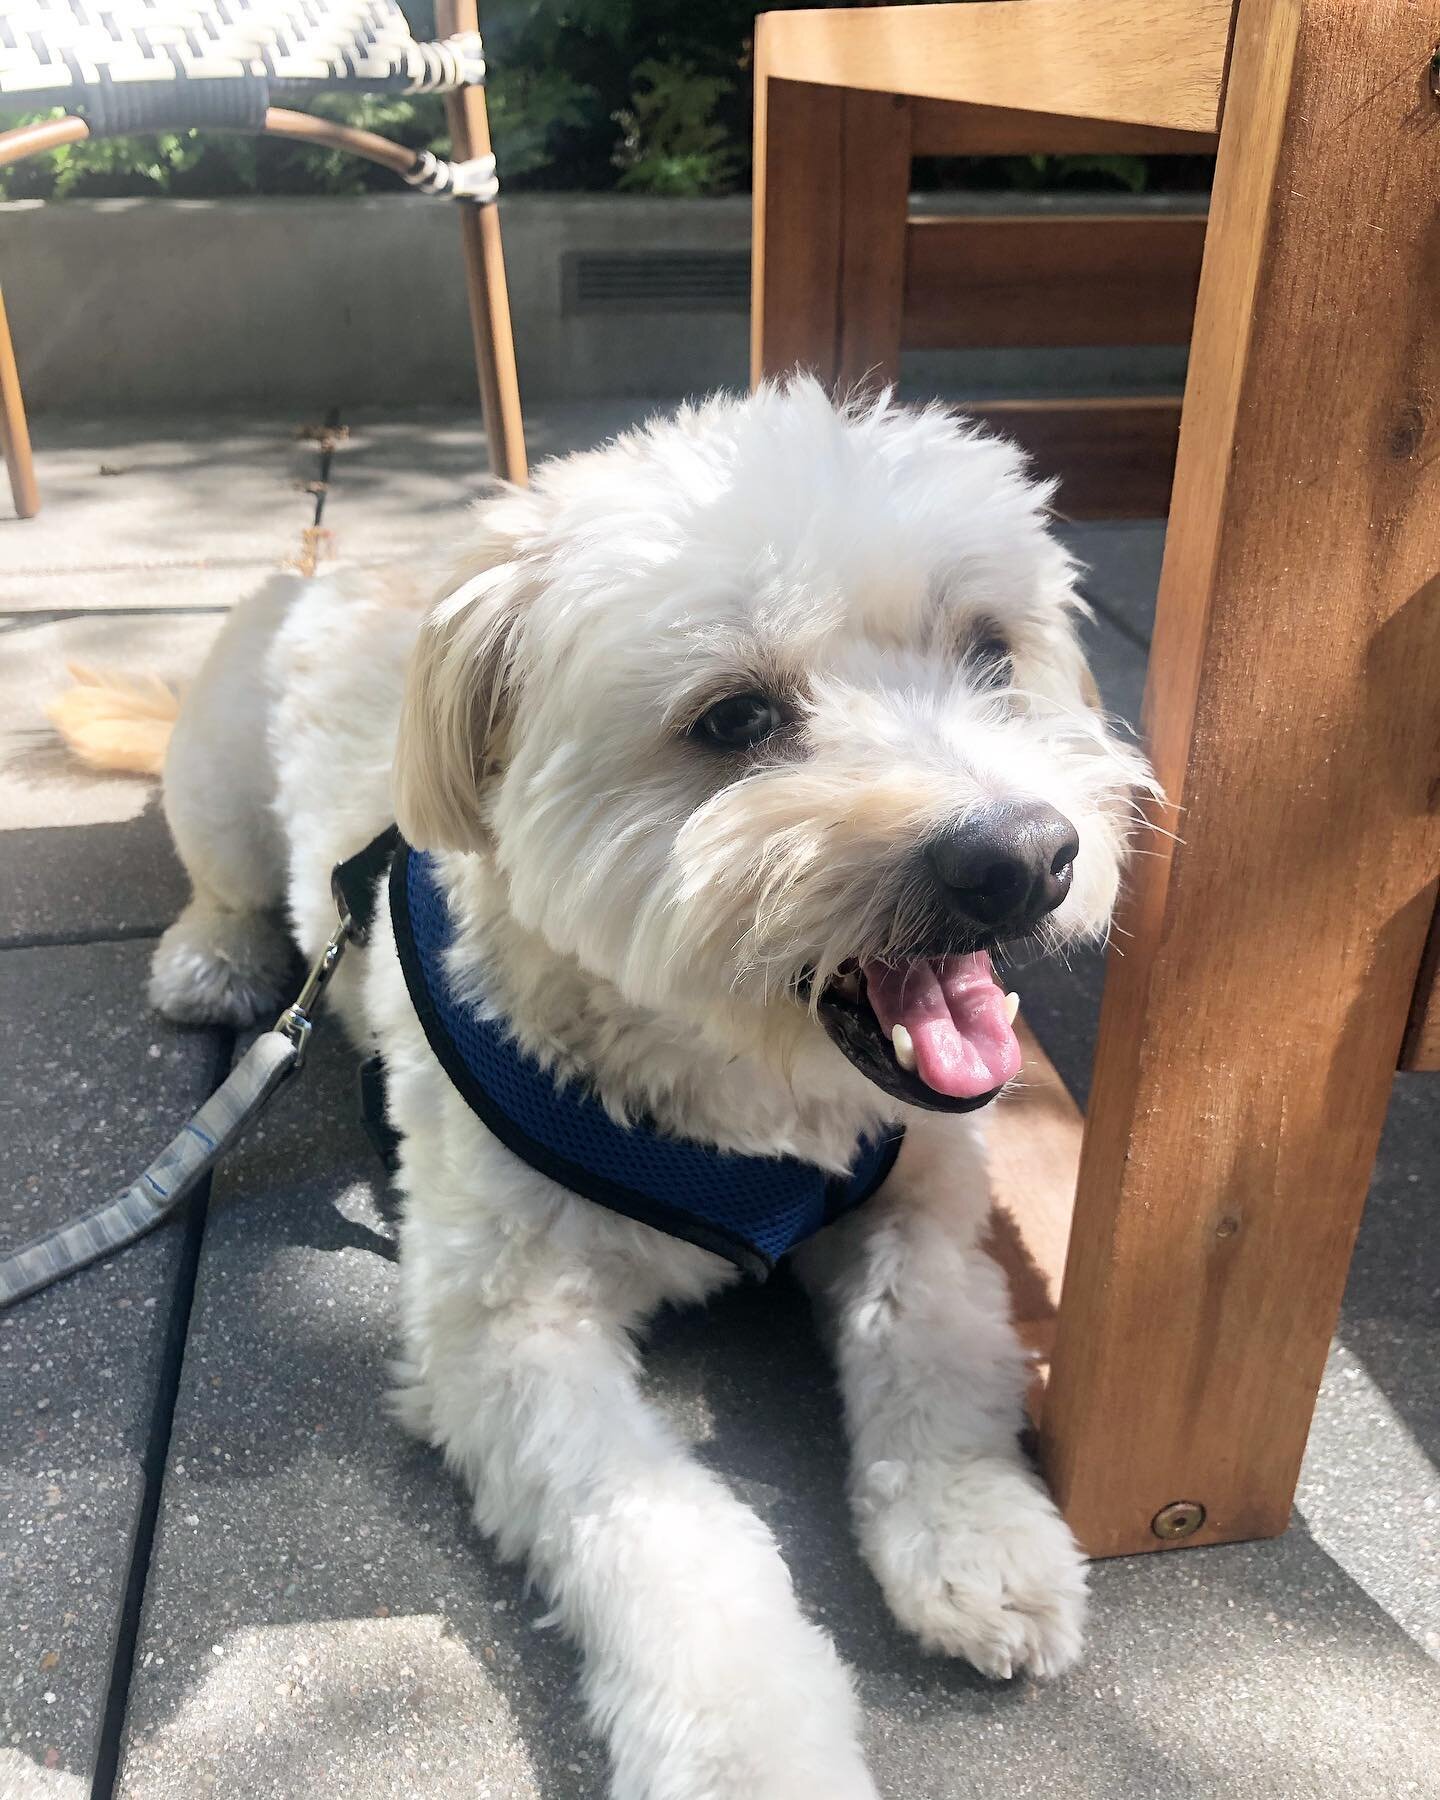 Getting a new home with a private patio this week! I&rsquo;m gonna be a downtown dog! Mom took me to visit my new place this morning and we can&rsquo;t wait to move in.
.
.
#moving #newstarts #patio #playing #athome #animalhumanemn #adoptdontshop #sf